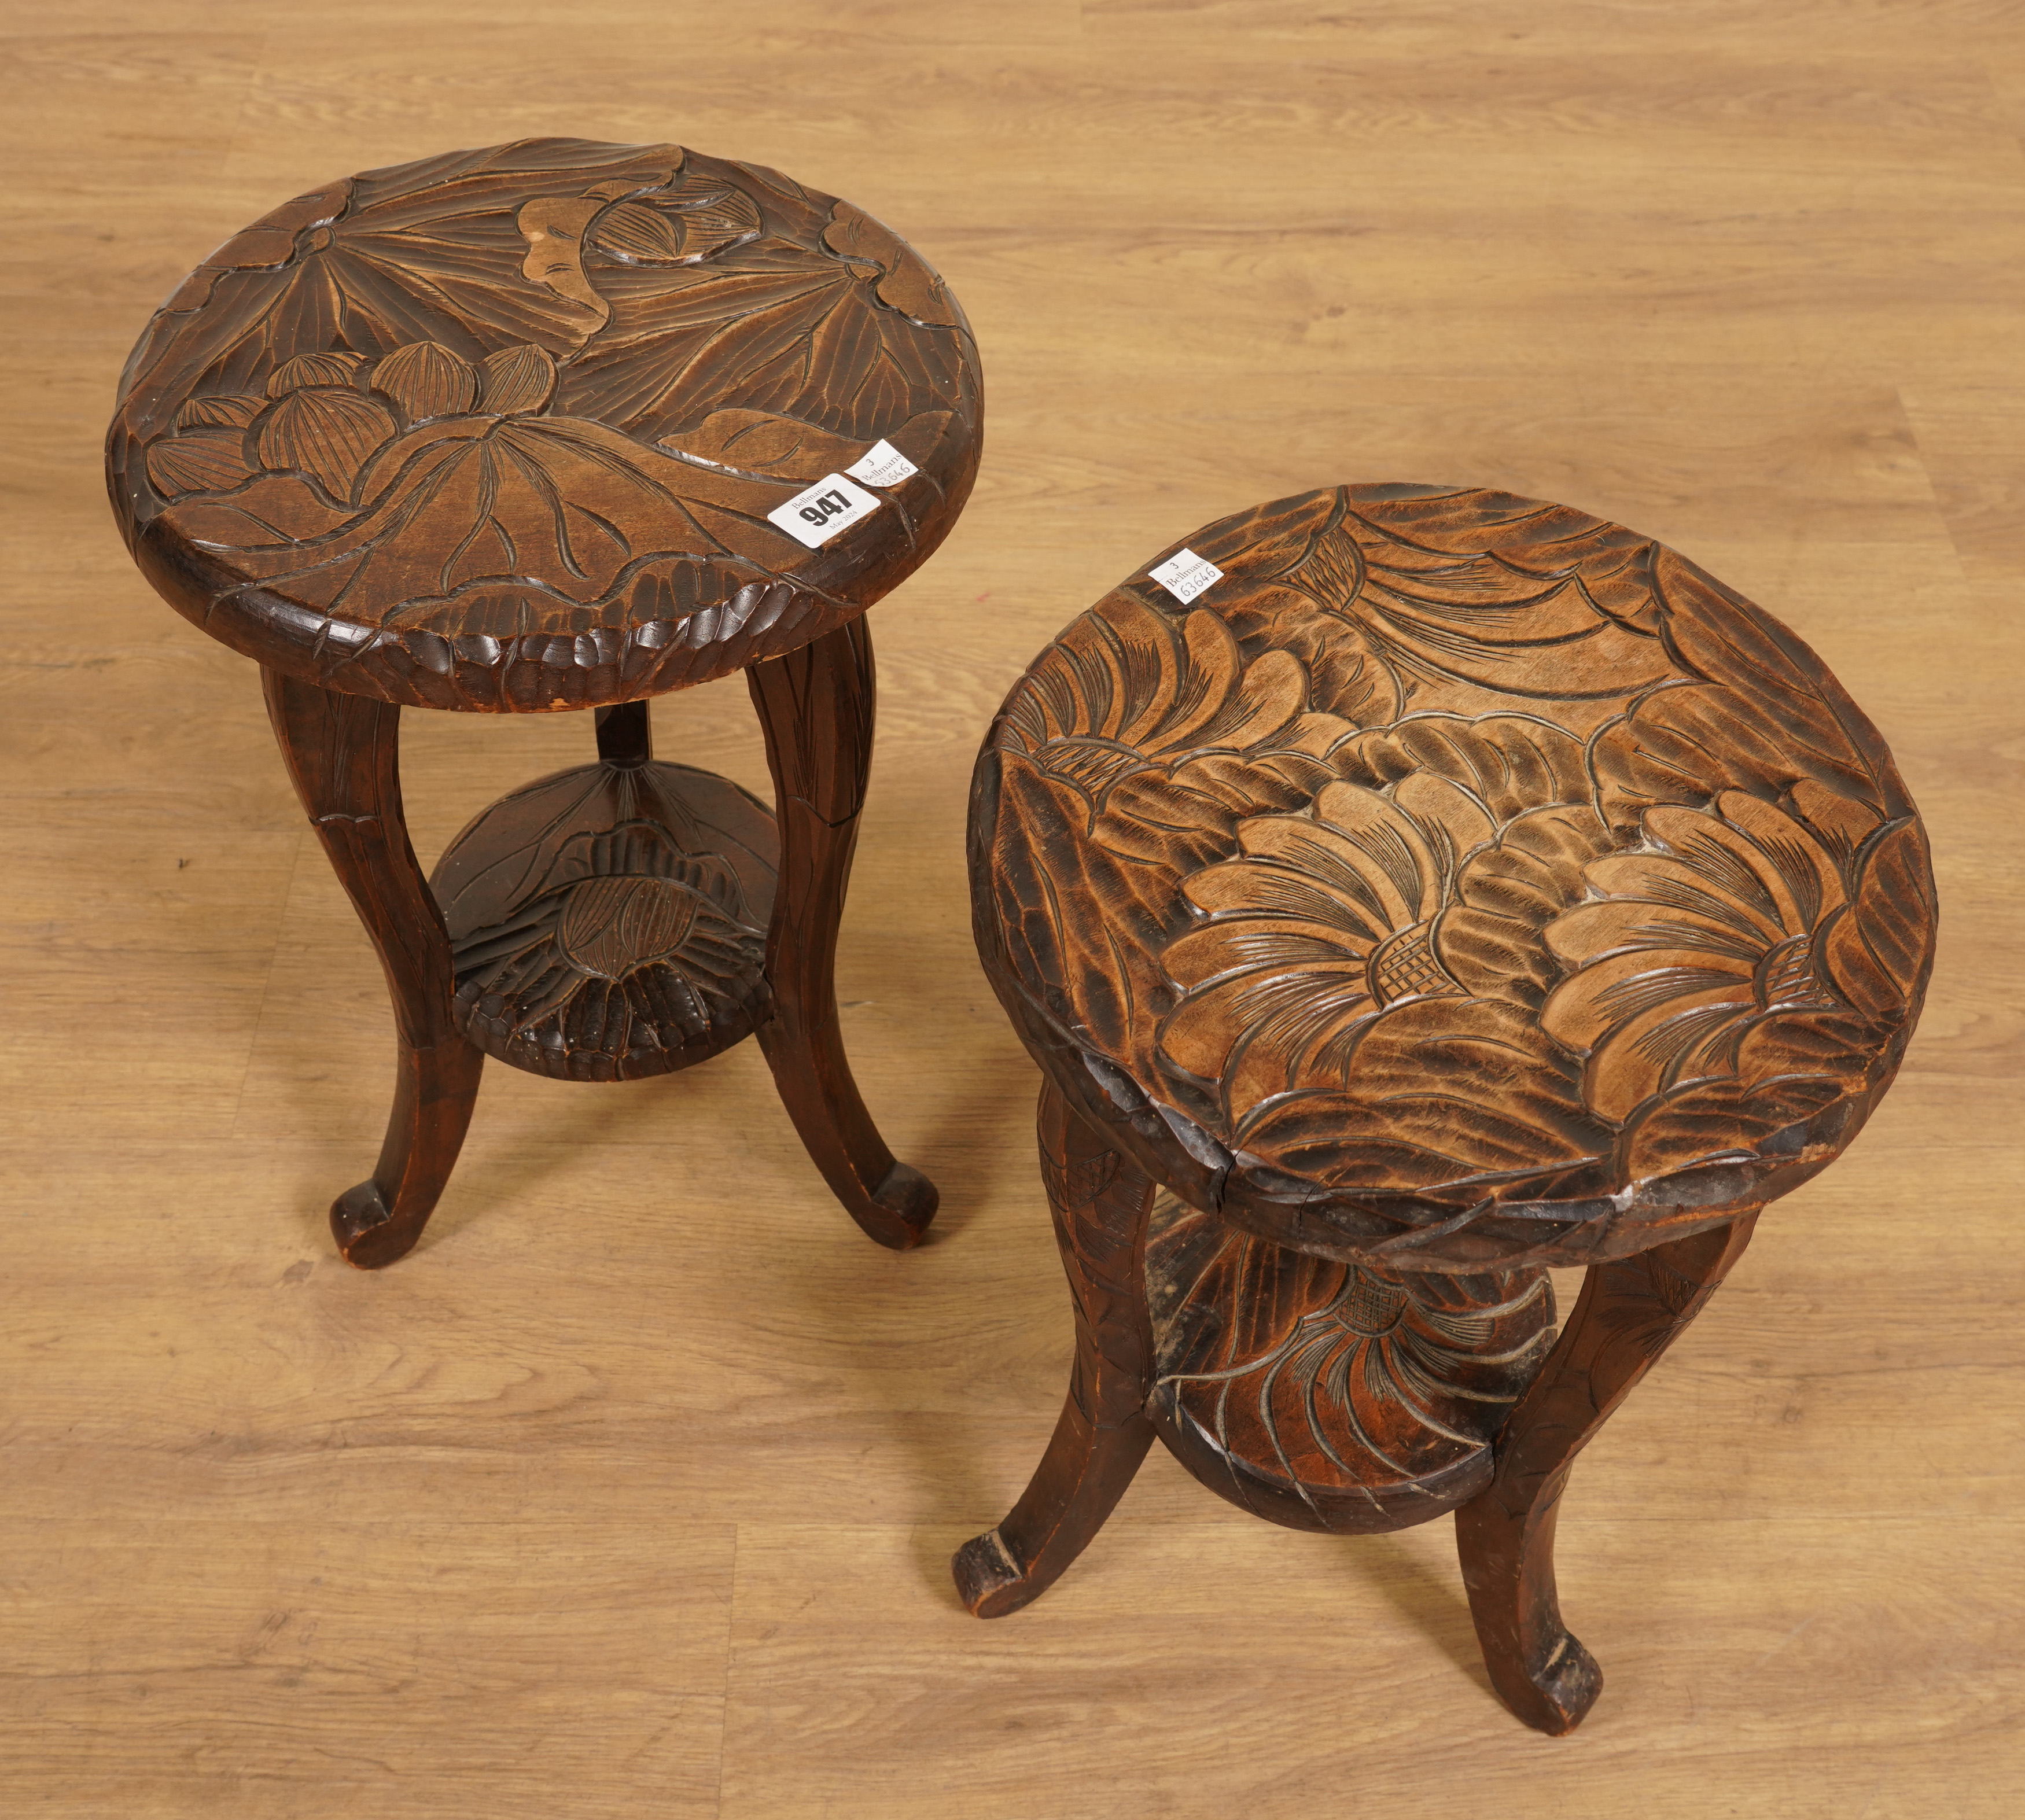 LIBERTY & CO; A PAIR OF FLORAL CARVED CIRCULAR SIDE TABLES (2) - Image 2 of 5